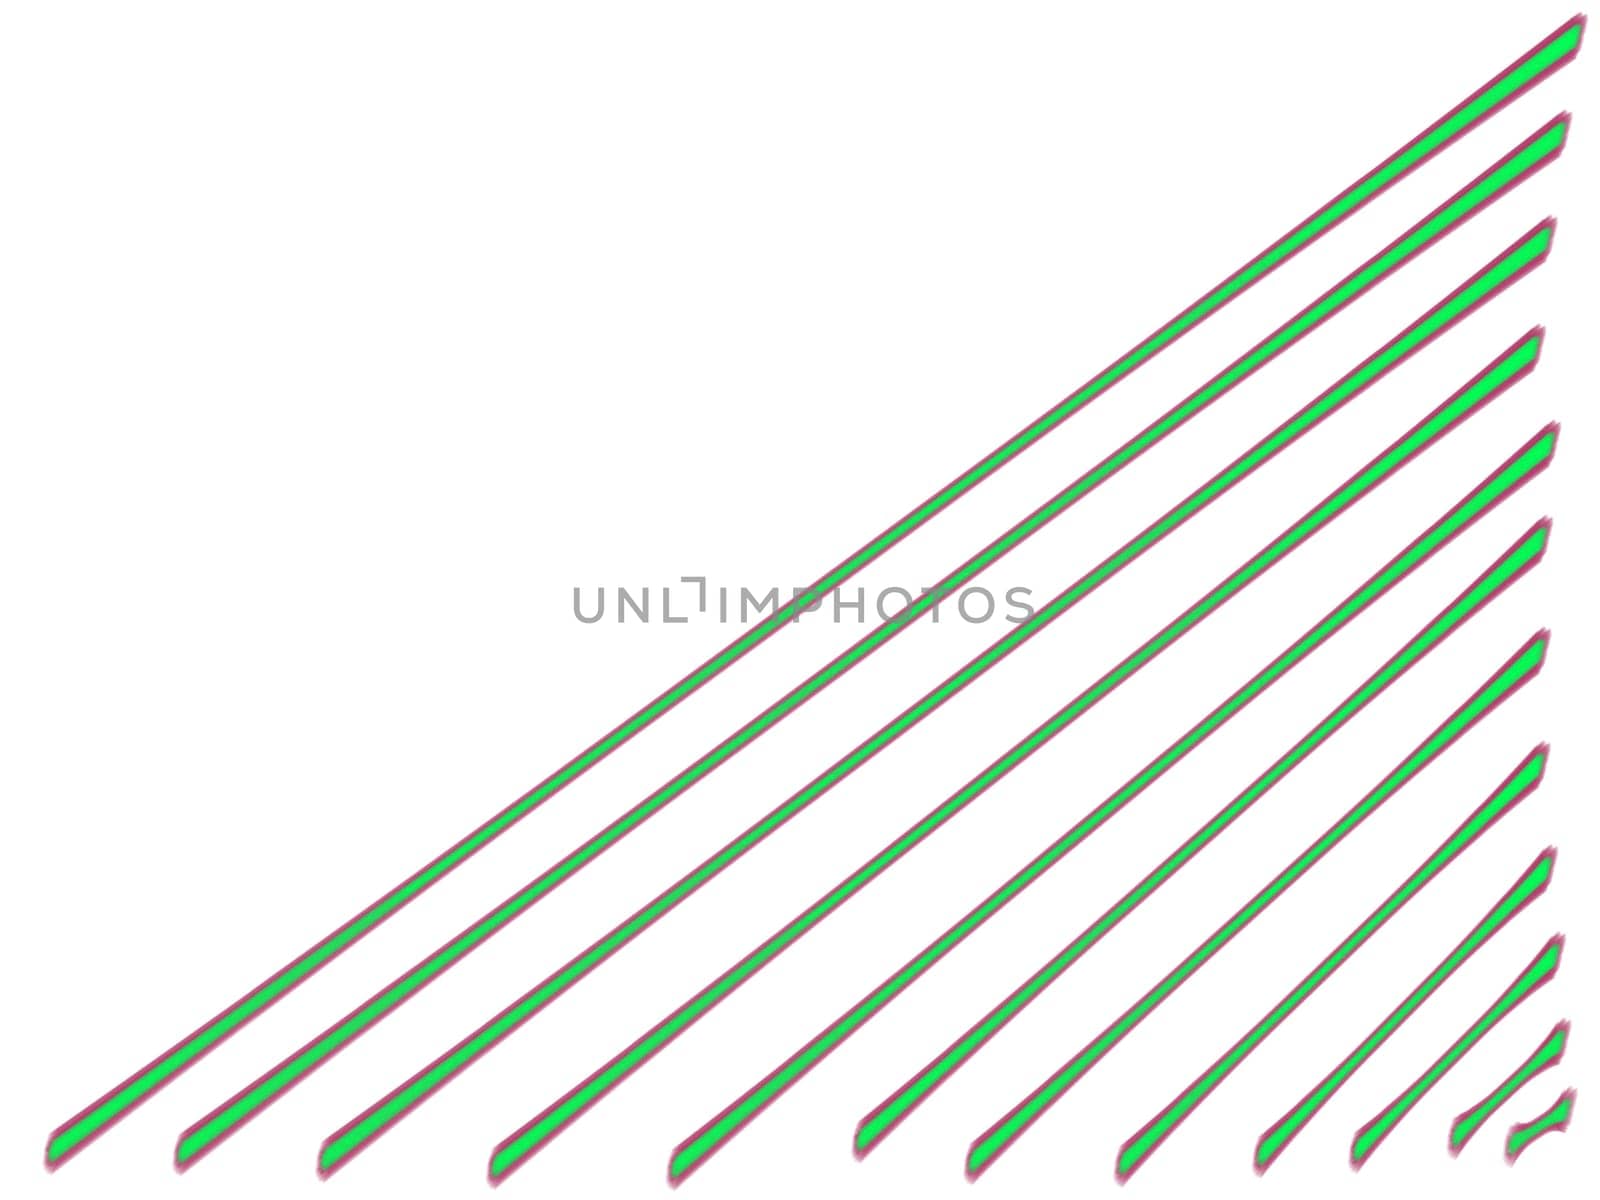 Green and orange lines across white background wallpaper . High quality illustration